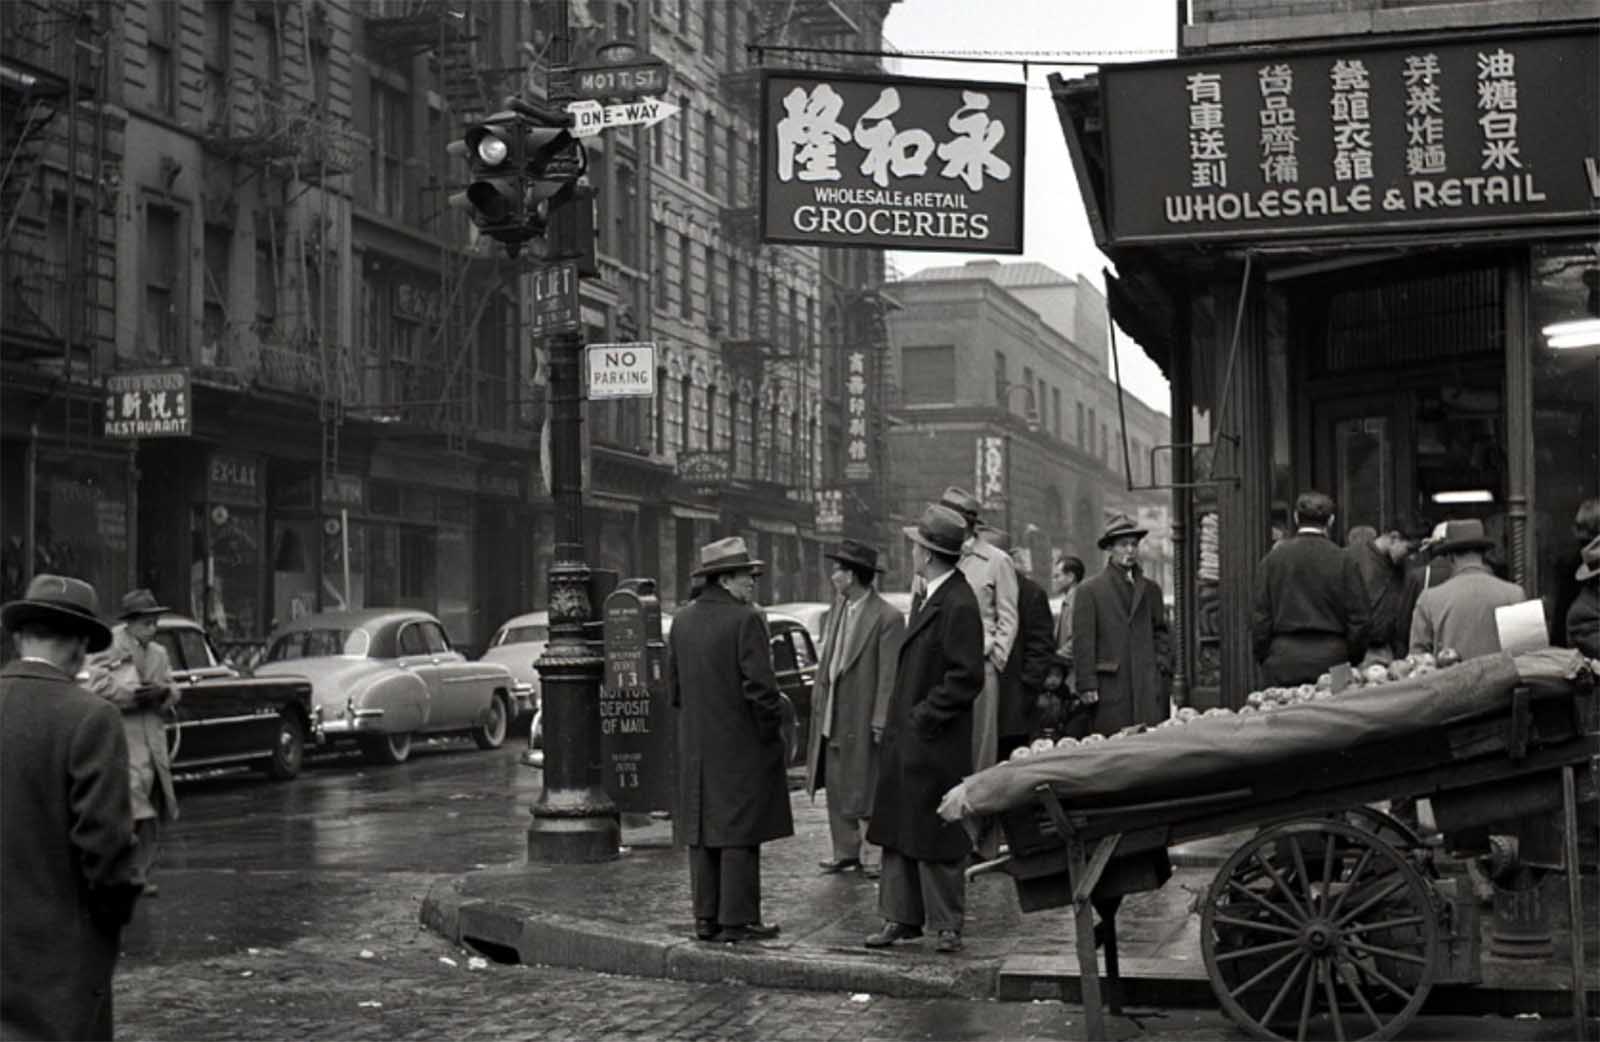 Vintage Photos of Everyday Life in 1950s New York 